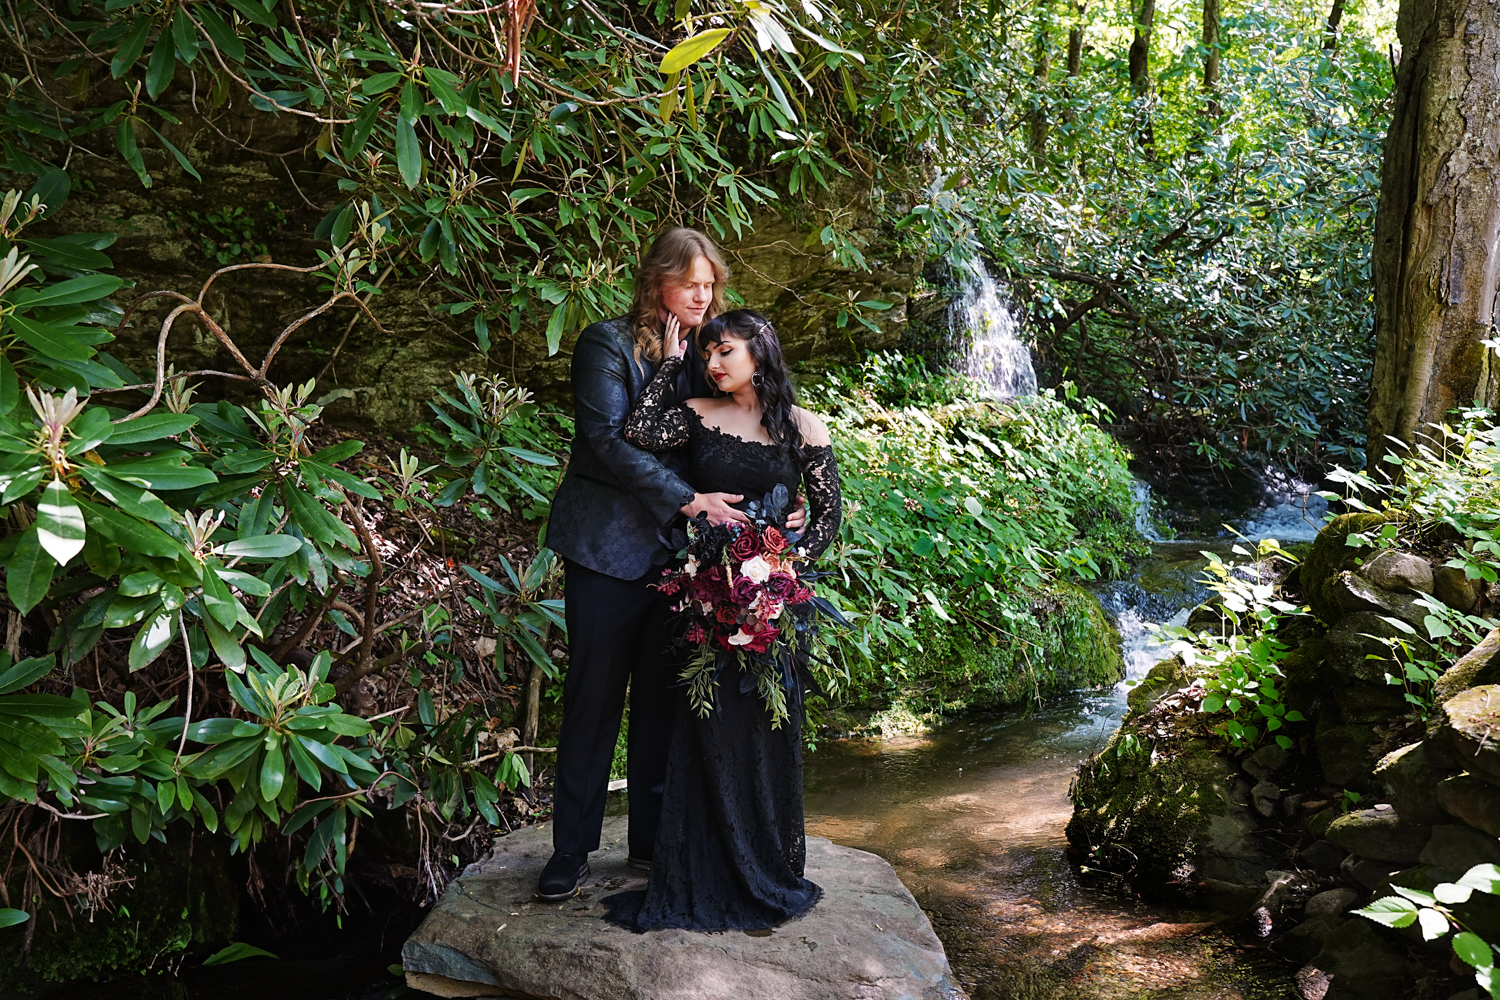 Bride in a black dress posing with her groom on a rock in the mountains by a waterfall